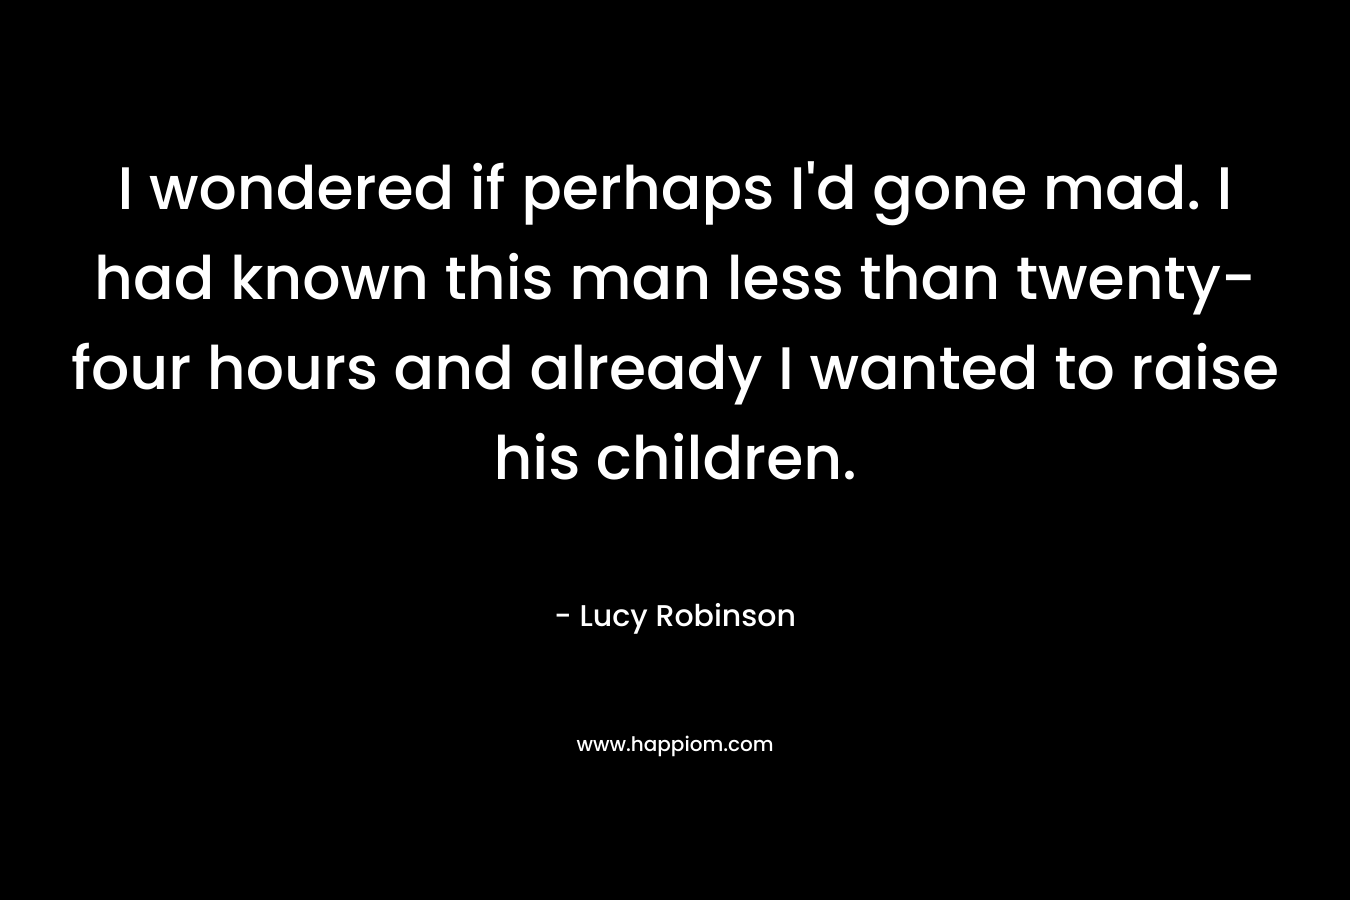 I wondered if perhaps I’d gone mad. I had known this man less than twenty-four hours and already I wanted to raise his children. – Lucy Robinson